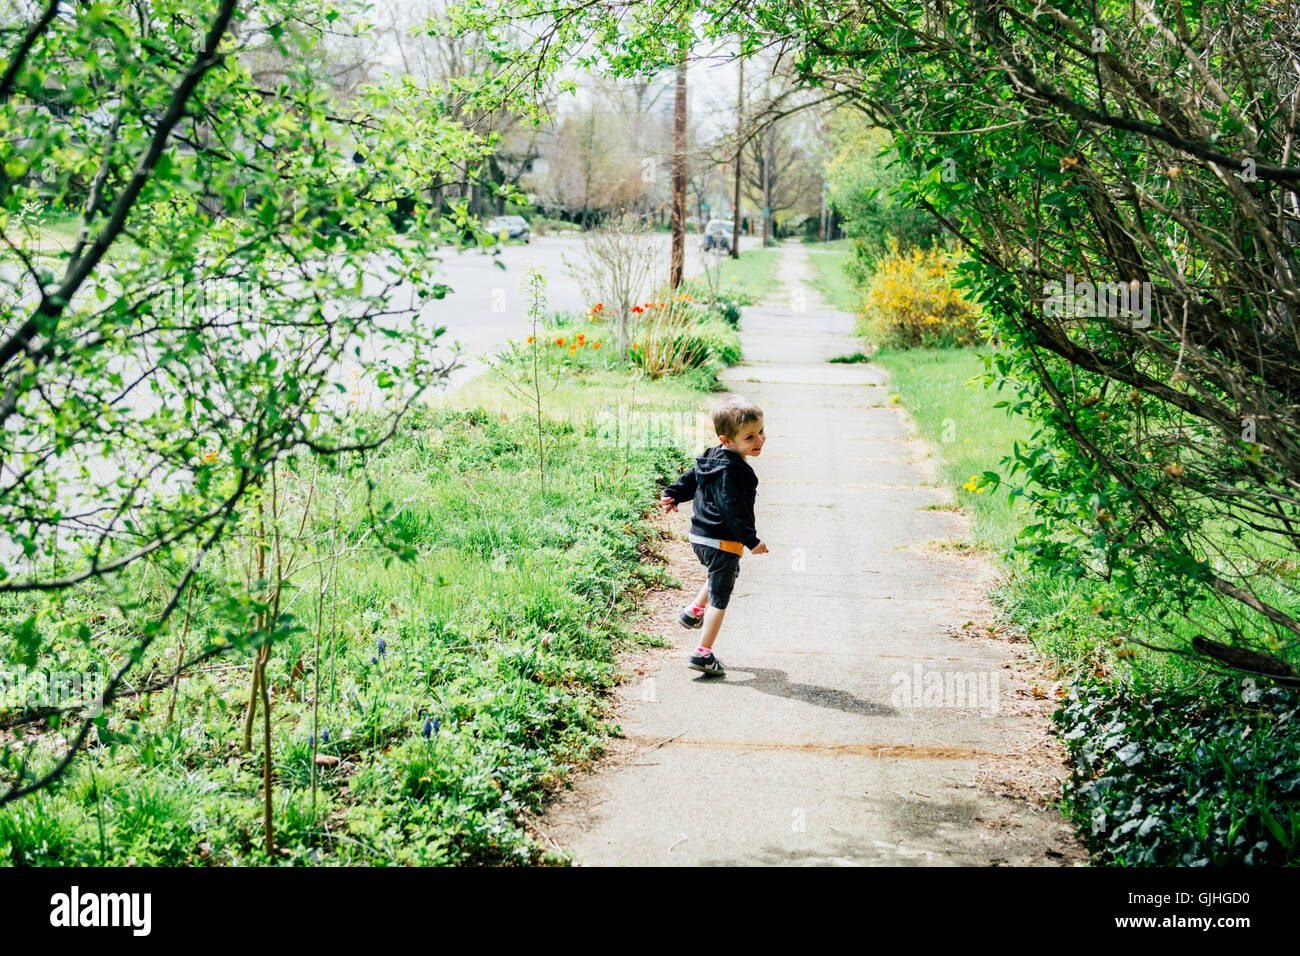 Boy running along pavement looking over his shoulder Stock Photo